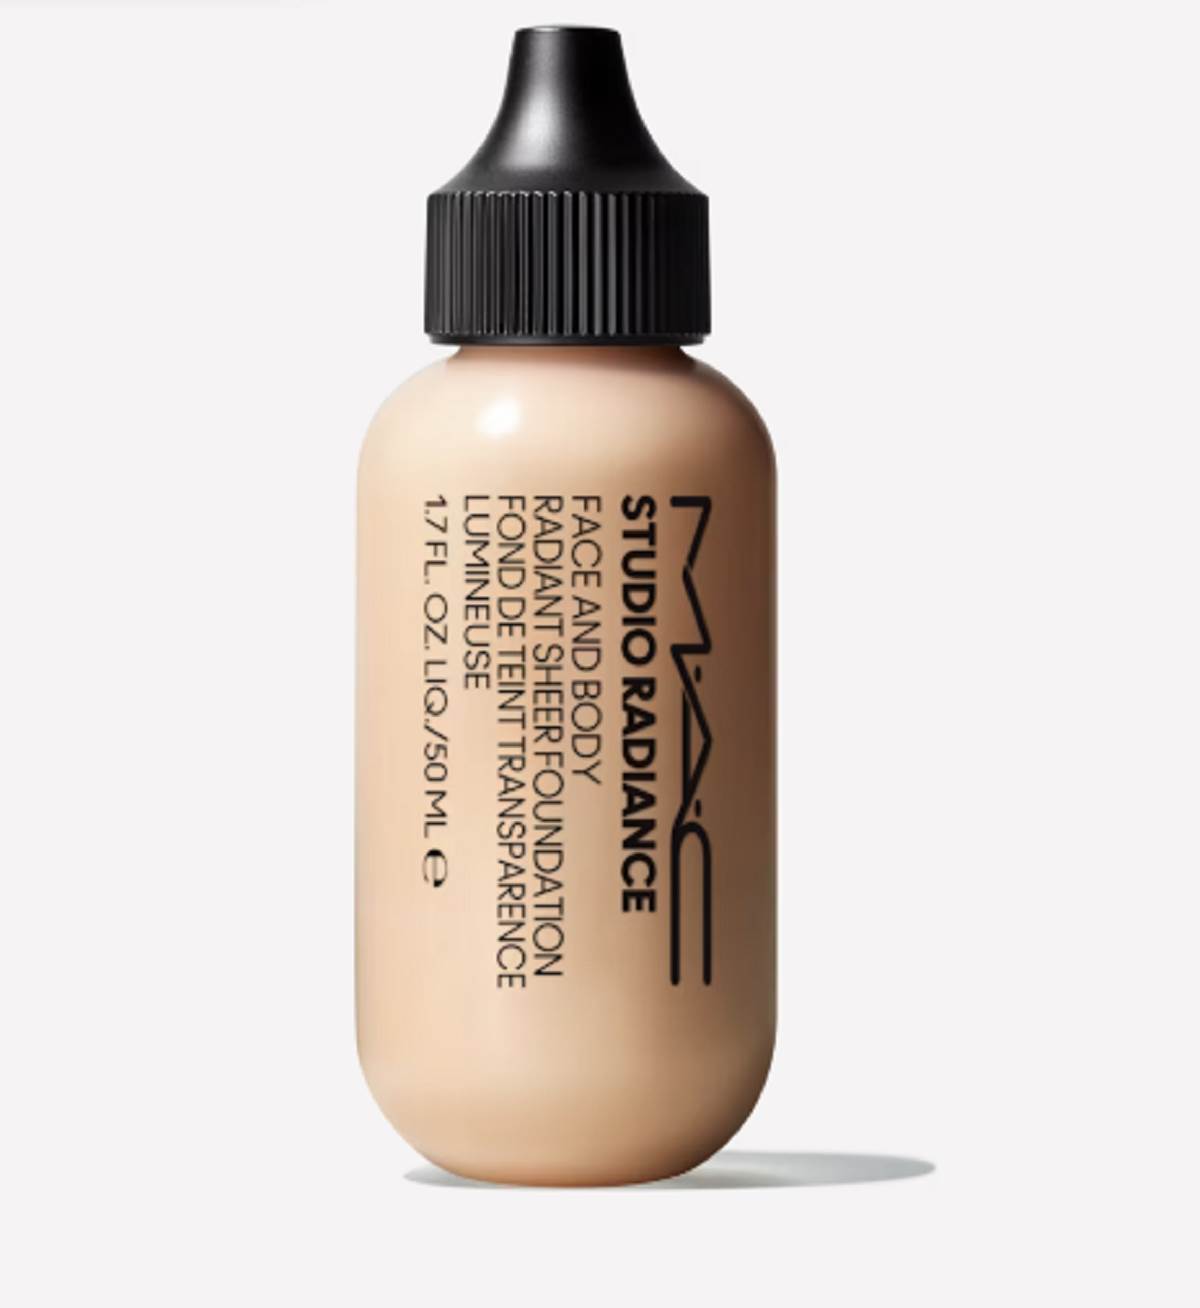  MAC Studio Radiance Face And Body Foundation. 